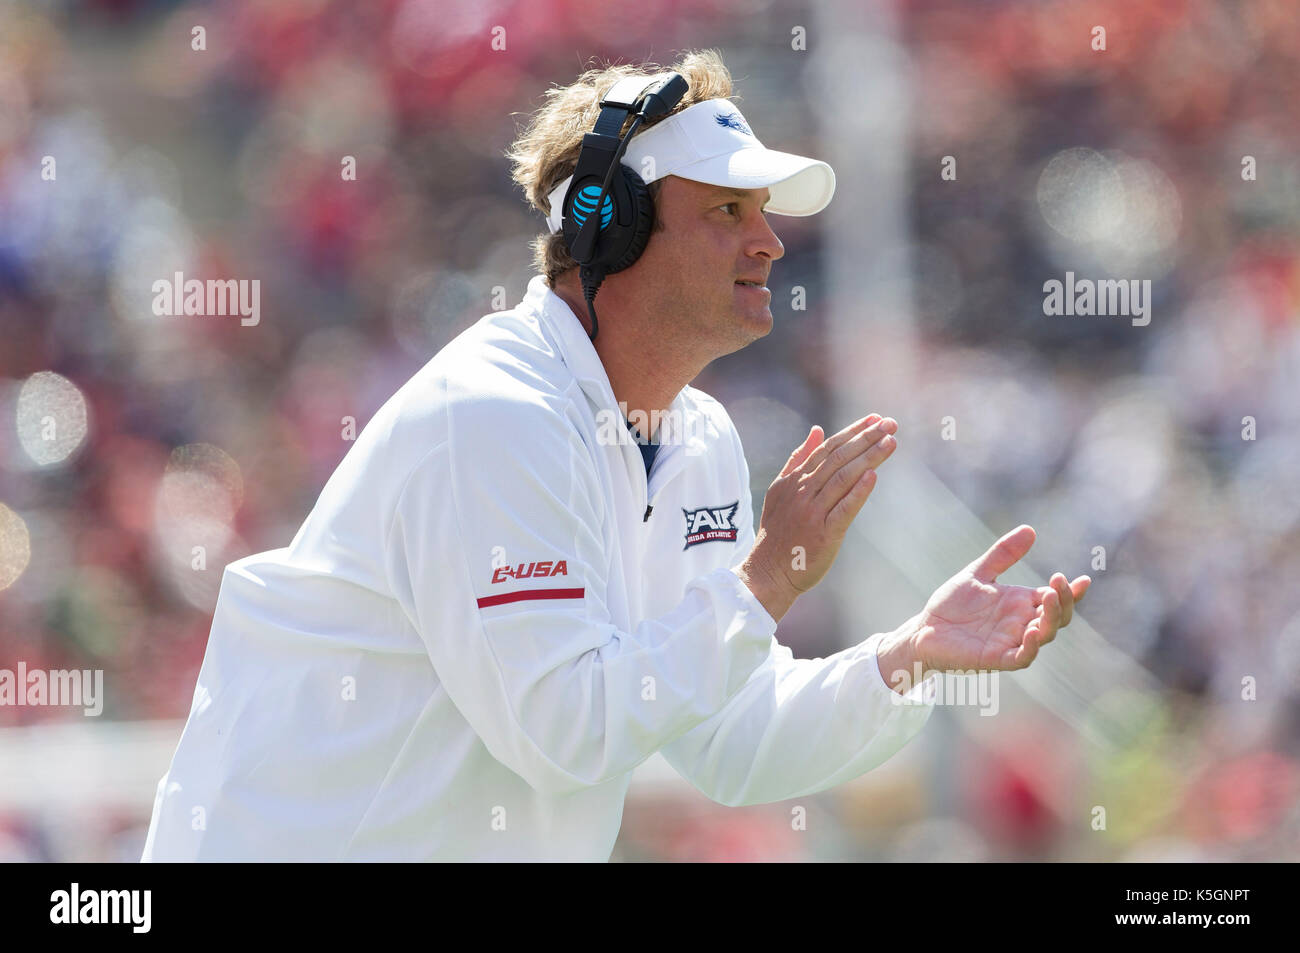 Madison, WI, USA. 9th Sep, 2017. Florida Atlantic head coach Lane Kiffin during the NCAA Football game between the Florida Atlantic Owls and the Wisconsin Badgers at Camp Randall Stadium in Madison, WI. Wisconsin defeated Florida Atlantic 31-14. John Fisher/CSM/Alamy Live News Stock Photo